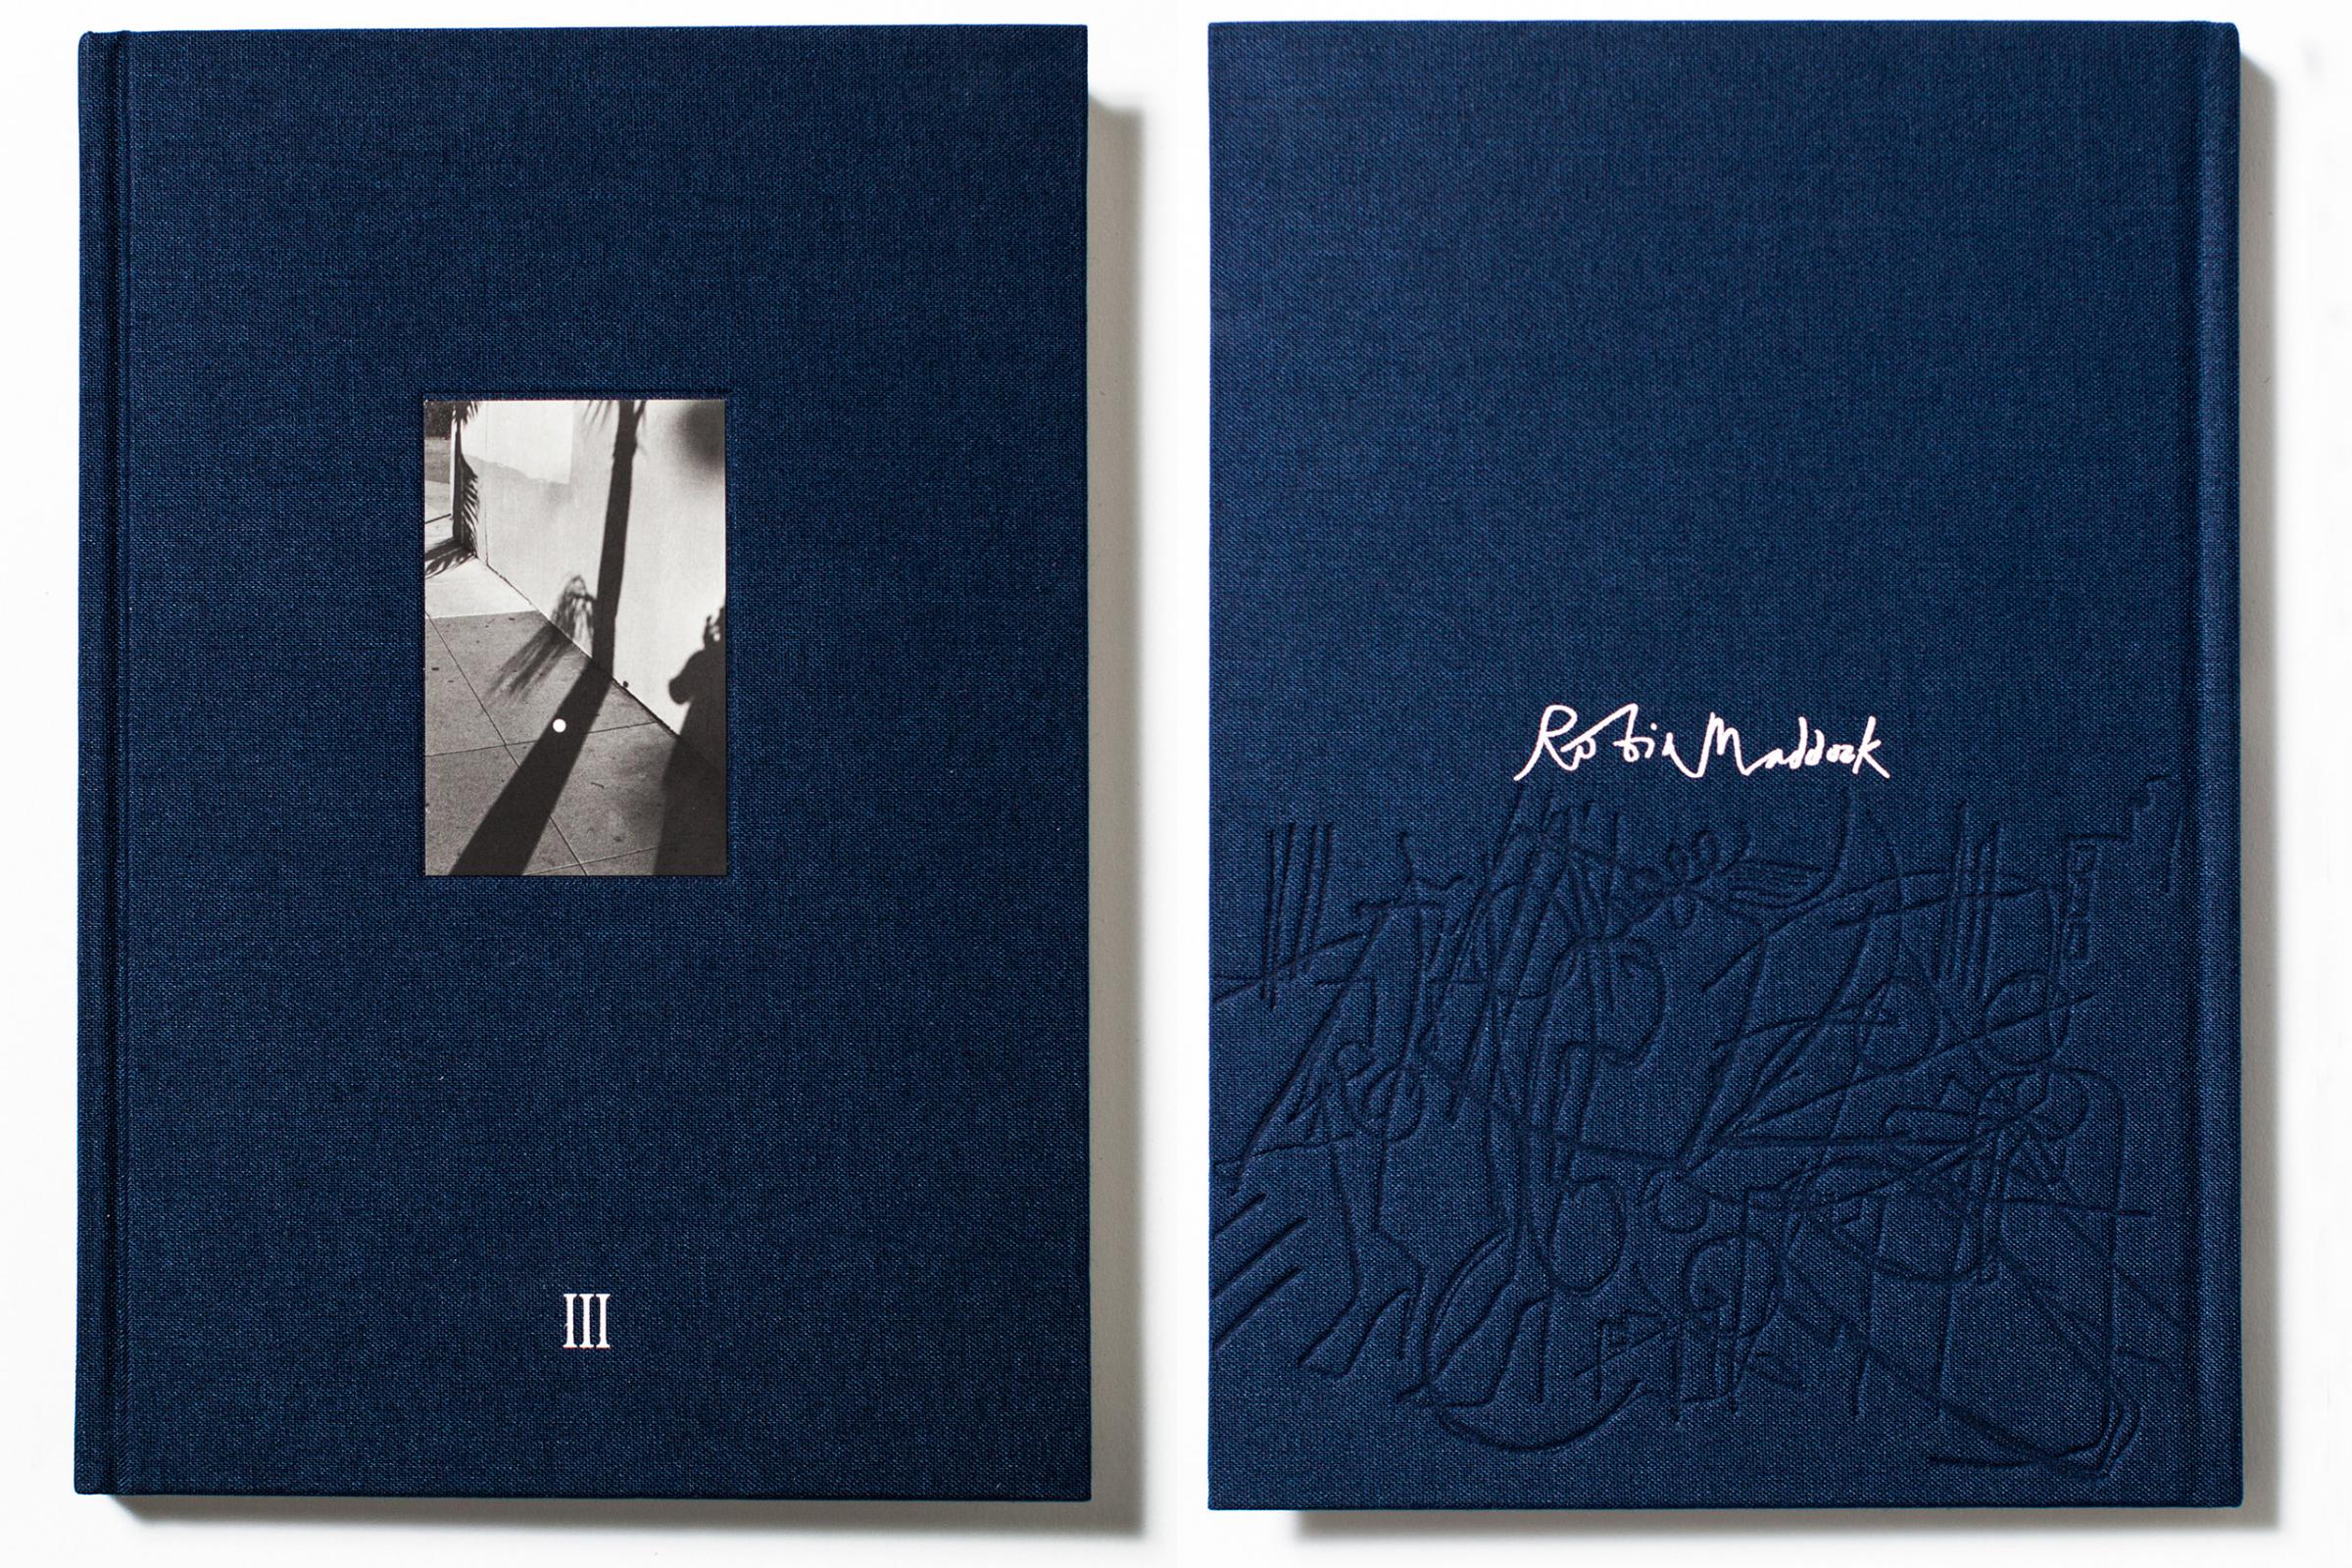 III byRobin Maddock, published by Trolley Books, selected by Jason Fulford, Photographer and Publisher of J&amp;L Books.